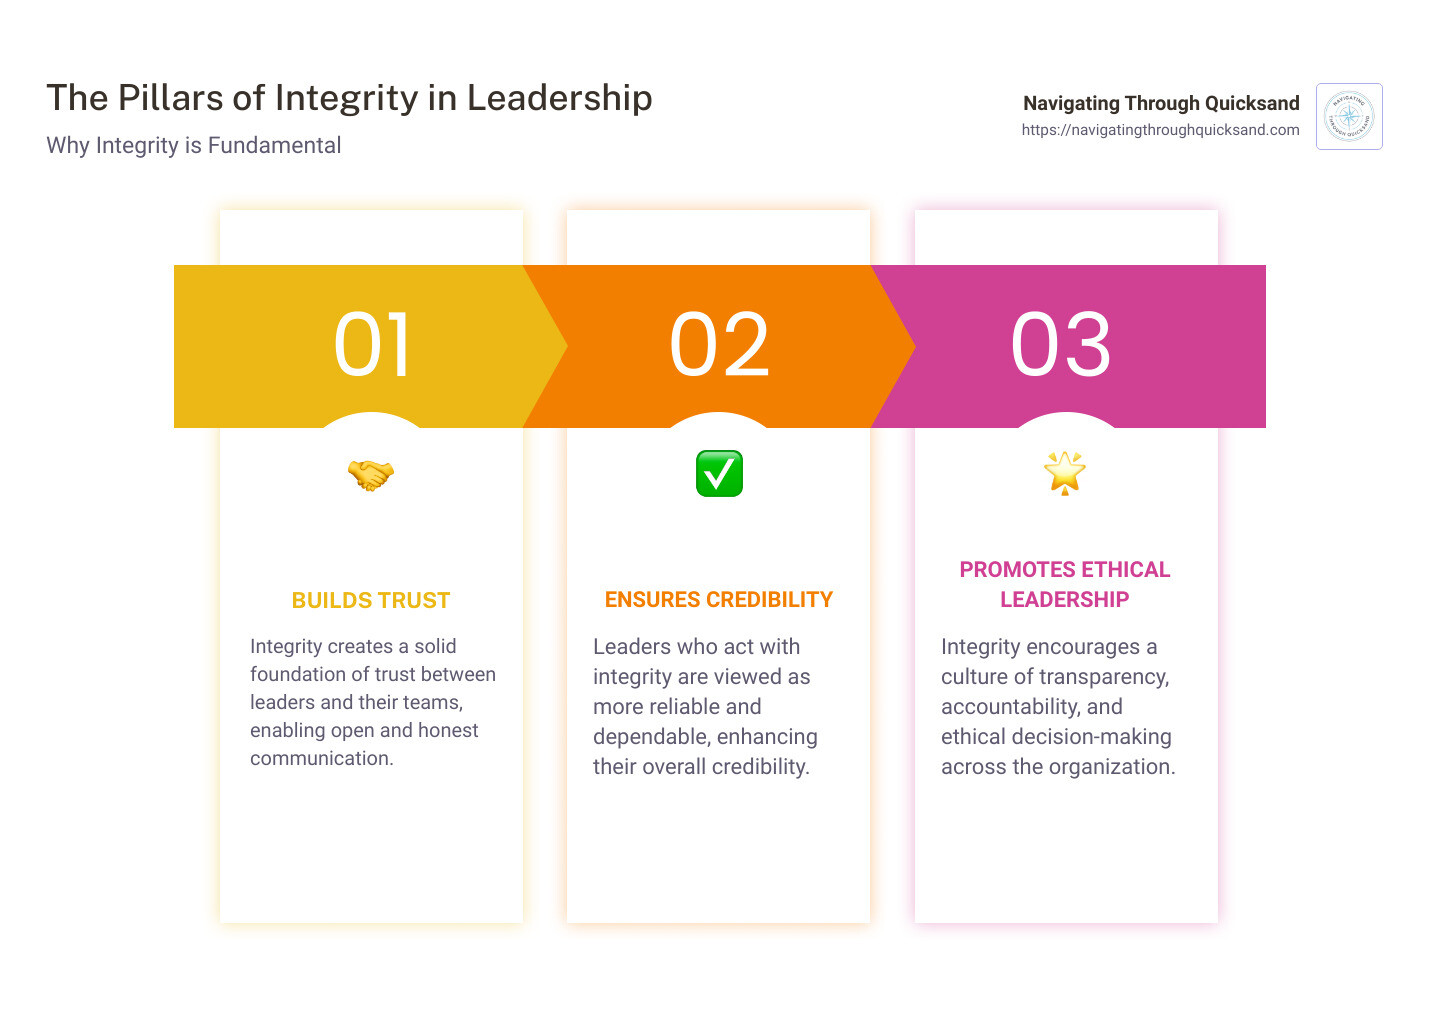 moral and ethical principles - practice integrity - moral integrity - great leaders - limiting questionable practices - business ethics to accept responsibility - ethical leader